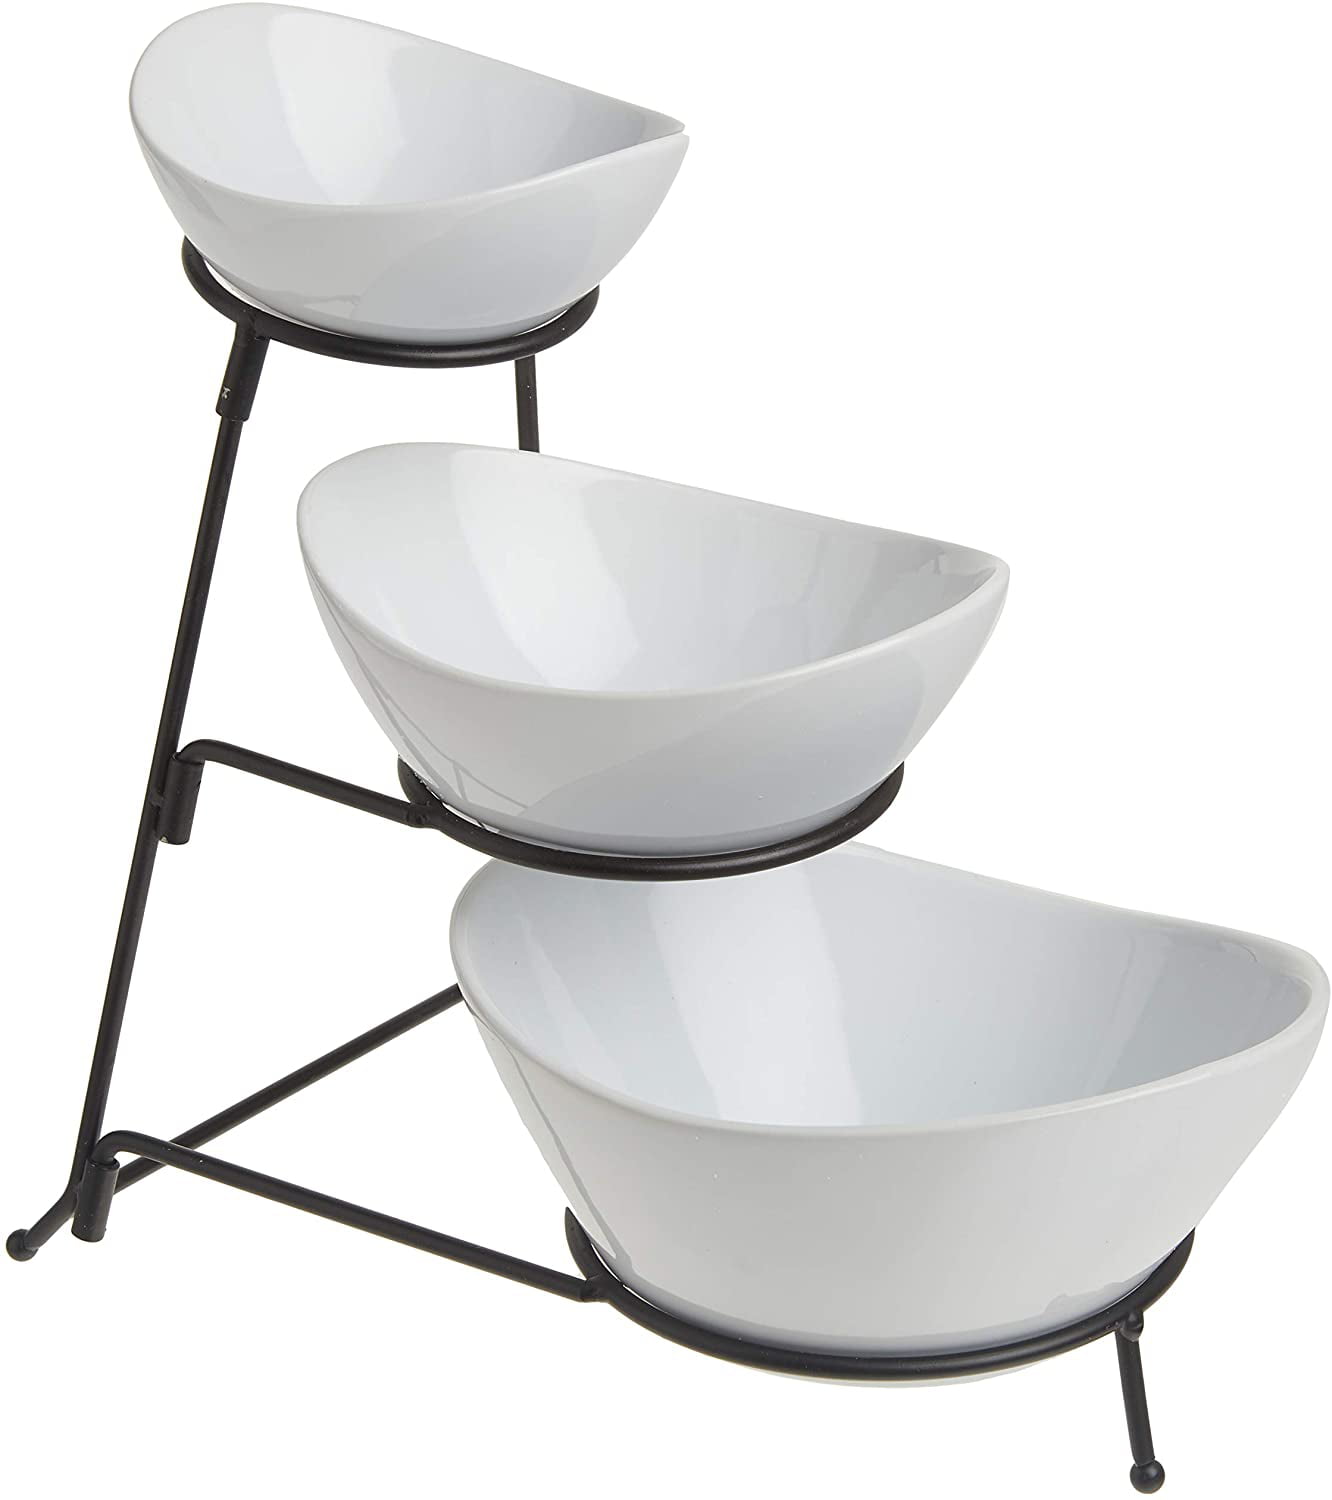 White Gibson Gracious Dining 3 Tier Oval Bowl Set Ware with Metal Rack 